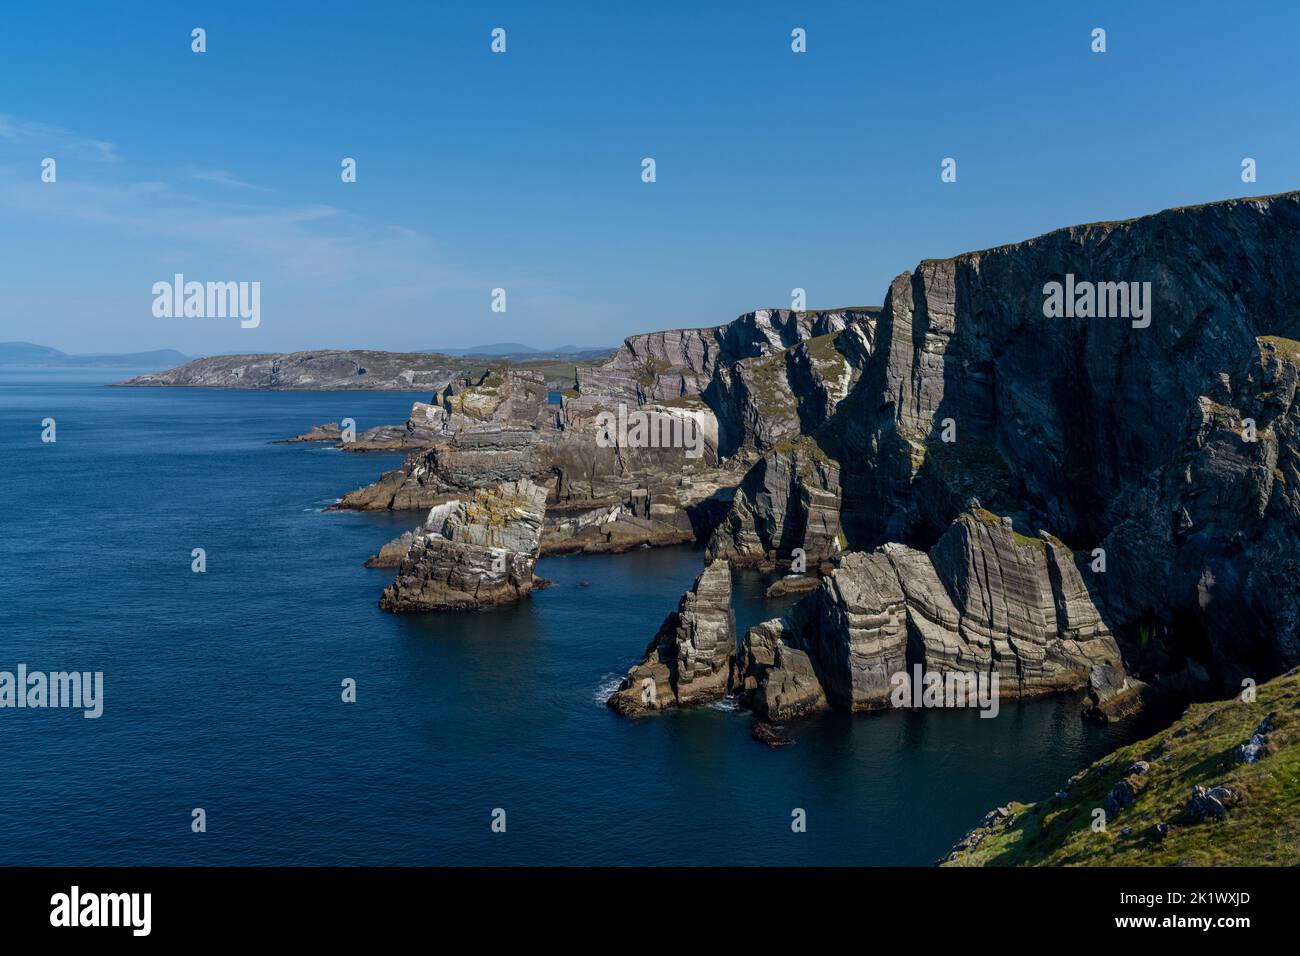 landscape view of the cliffs and coast of the Mizen Peninsula in western Ireland Stock Photo